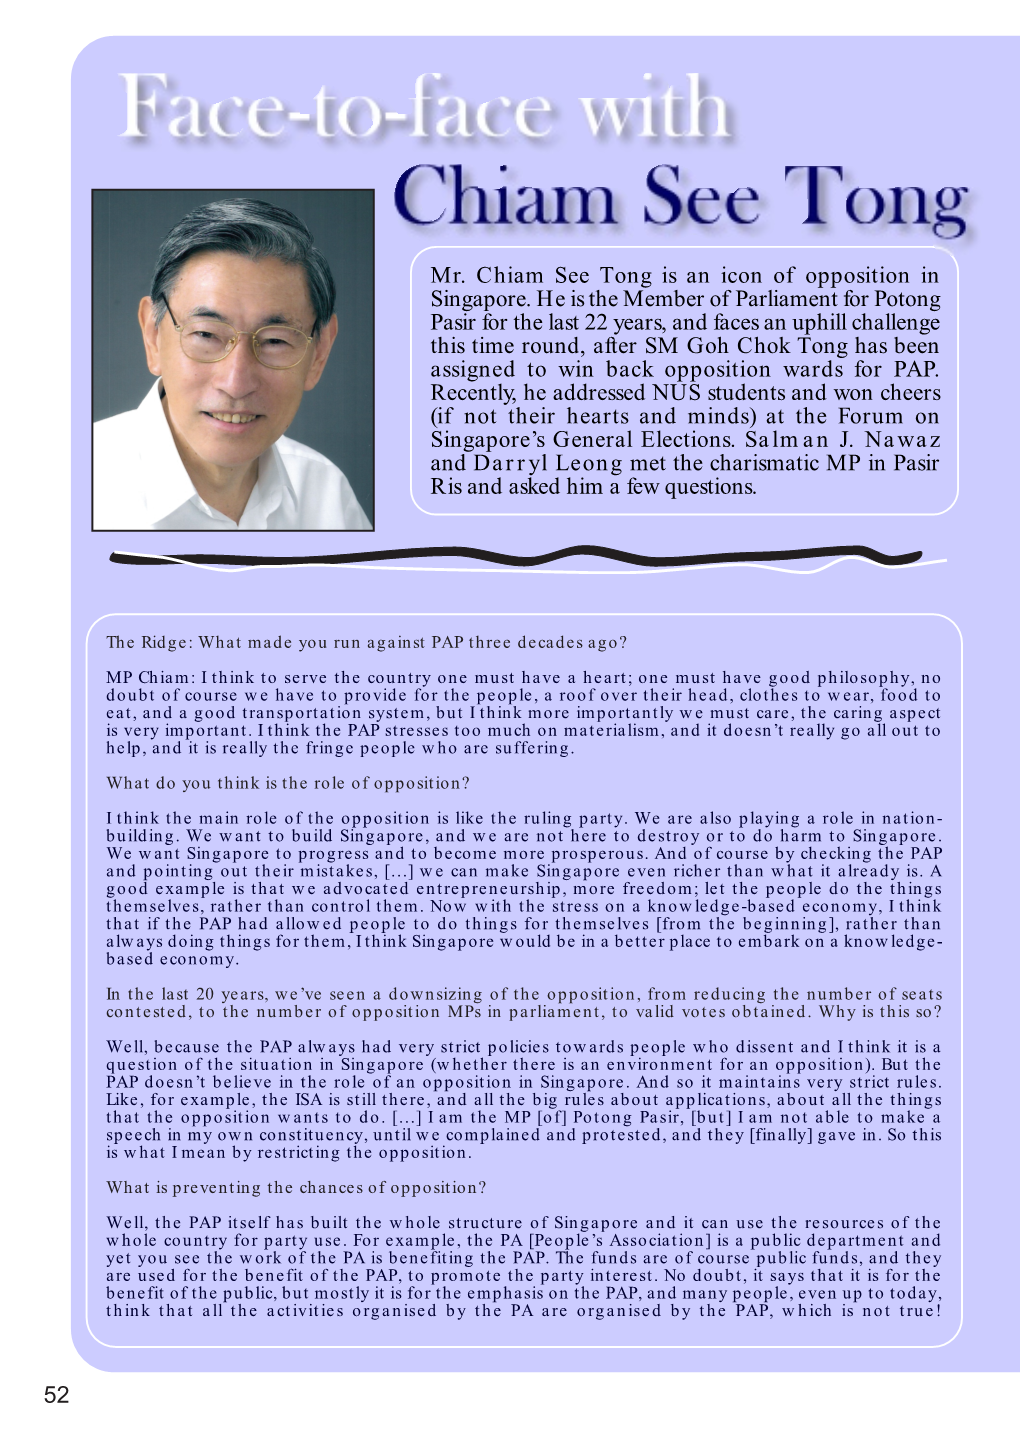 52 Mr. Chiam See Tong Is an Icon of Opposition in Singapore. He Is The